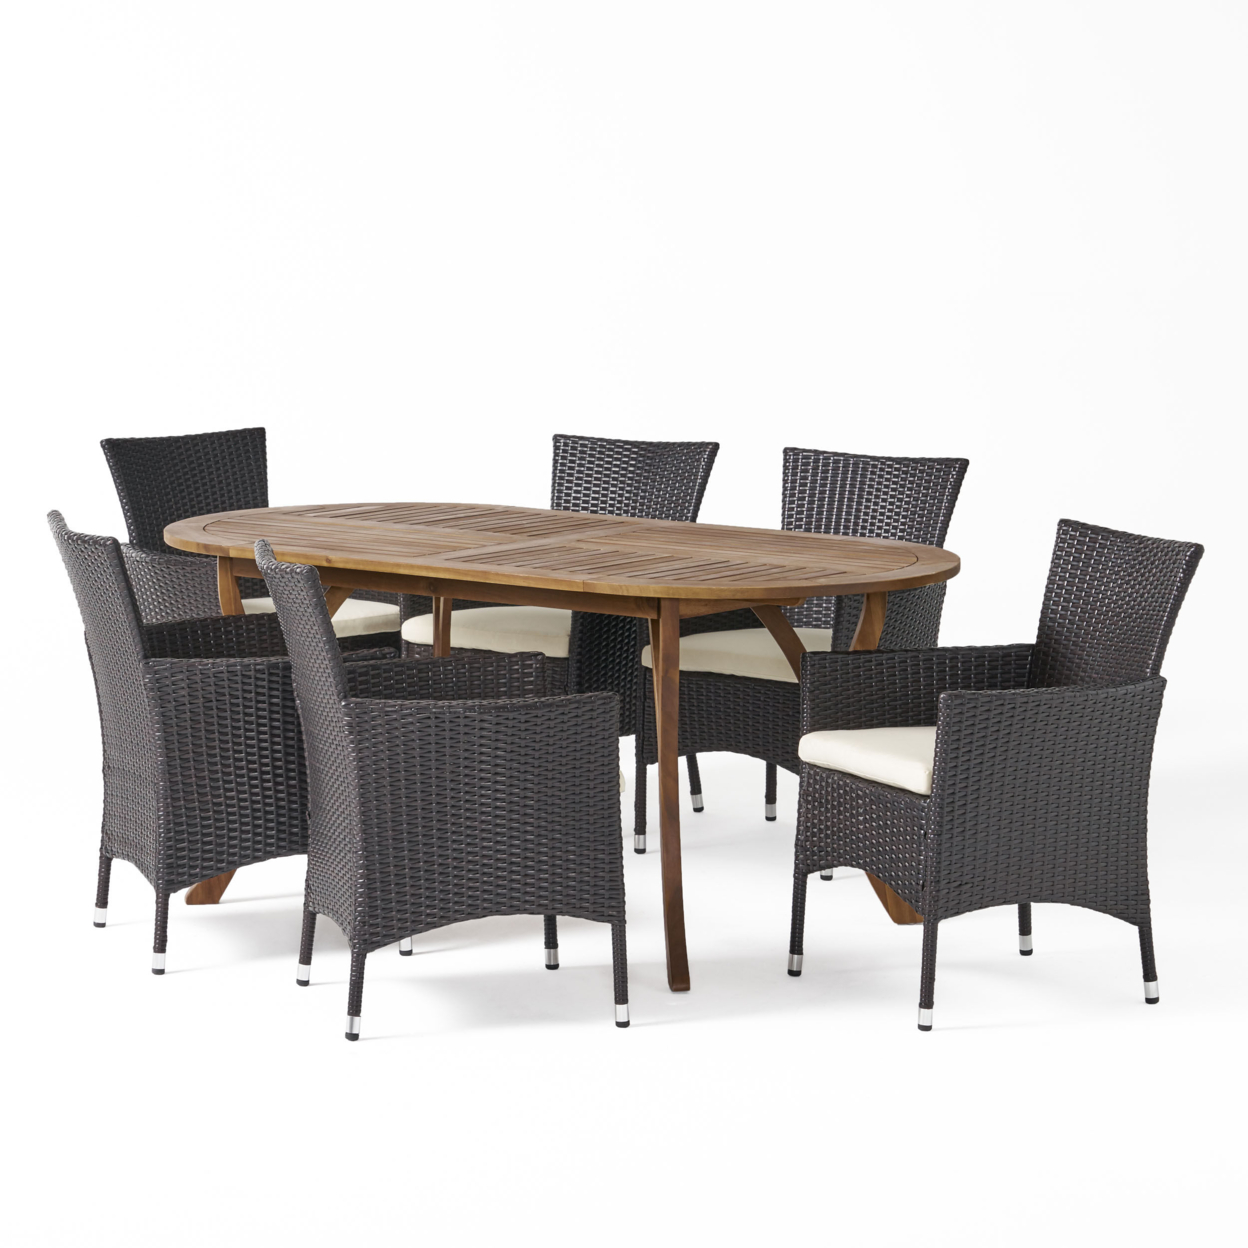 Edna Outdoor 7 Piece Acacia Wood And Wicker Dining Set, Teak With Multi Brown Chairs